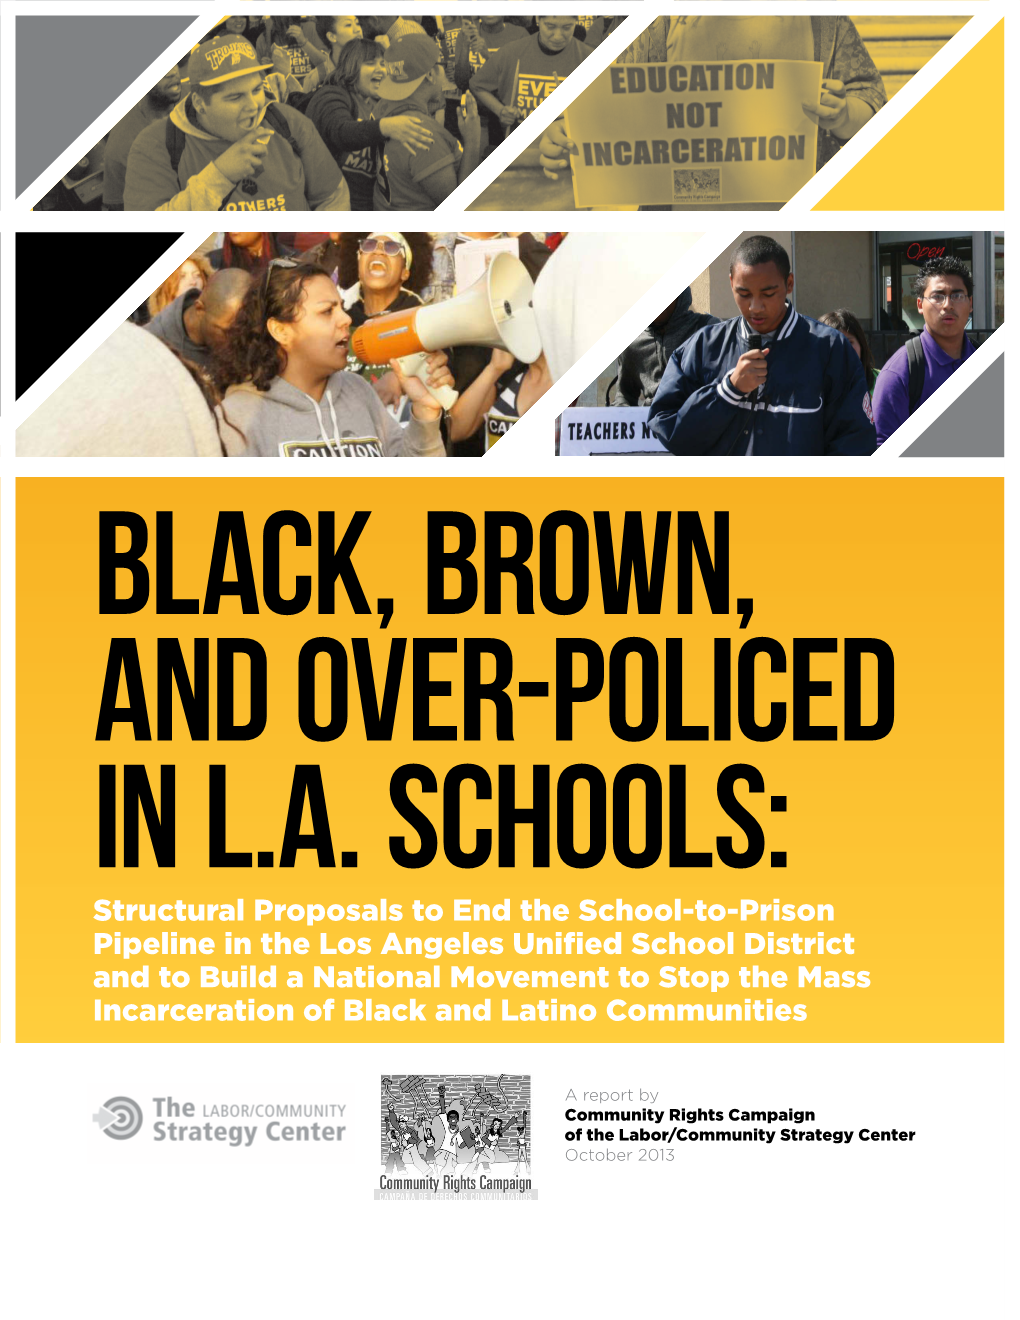 Black, Brown, and Over-Policed in L.A. Schools